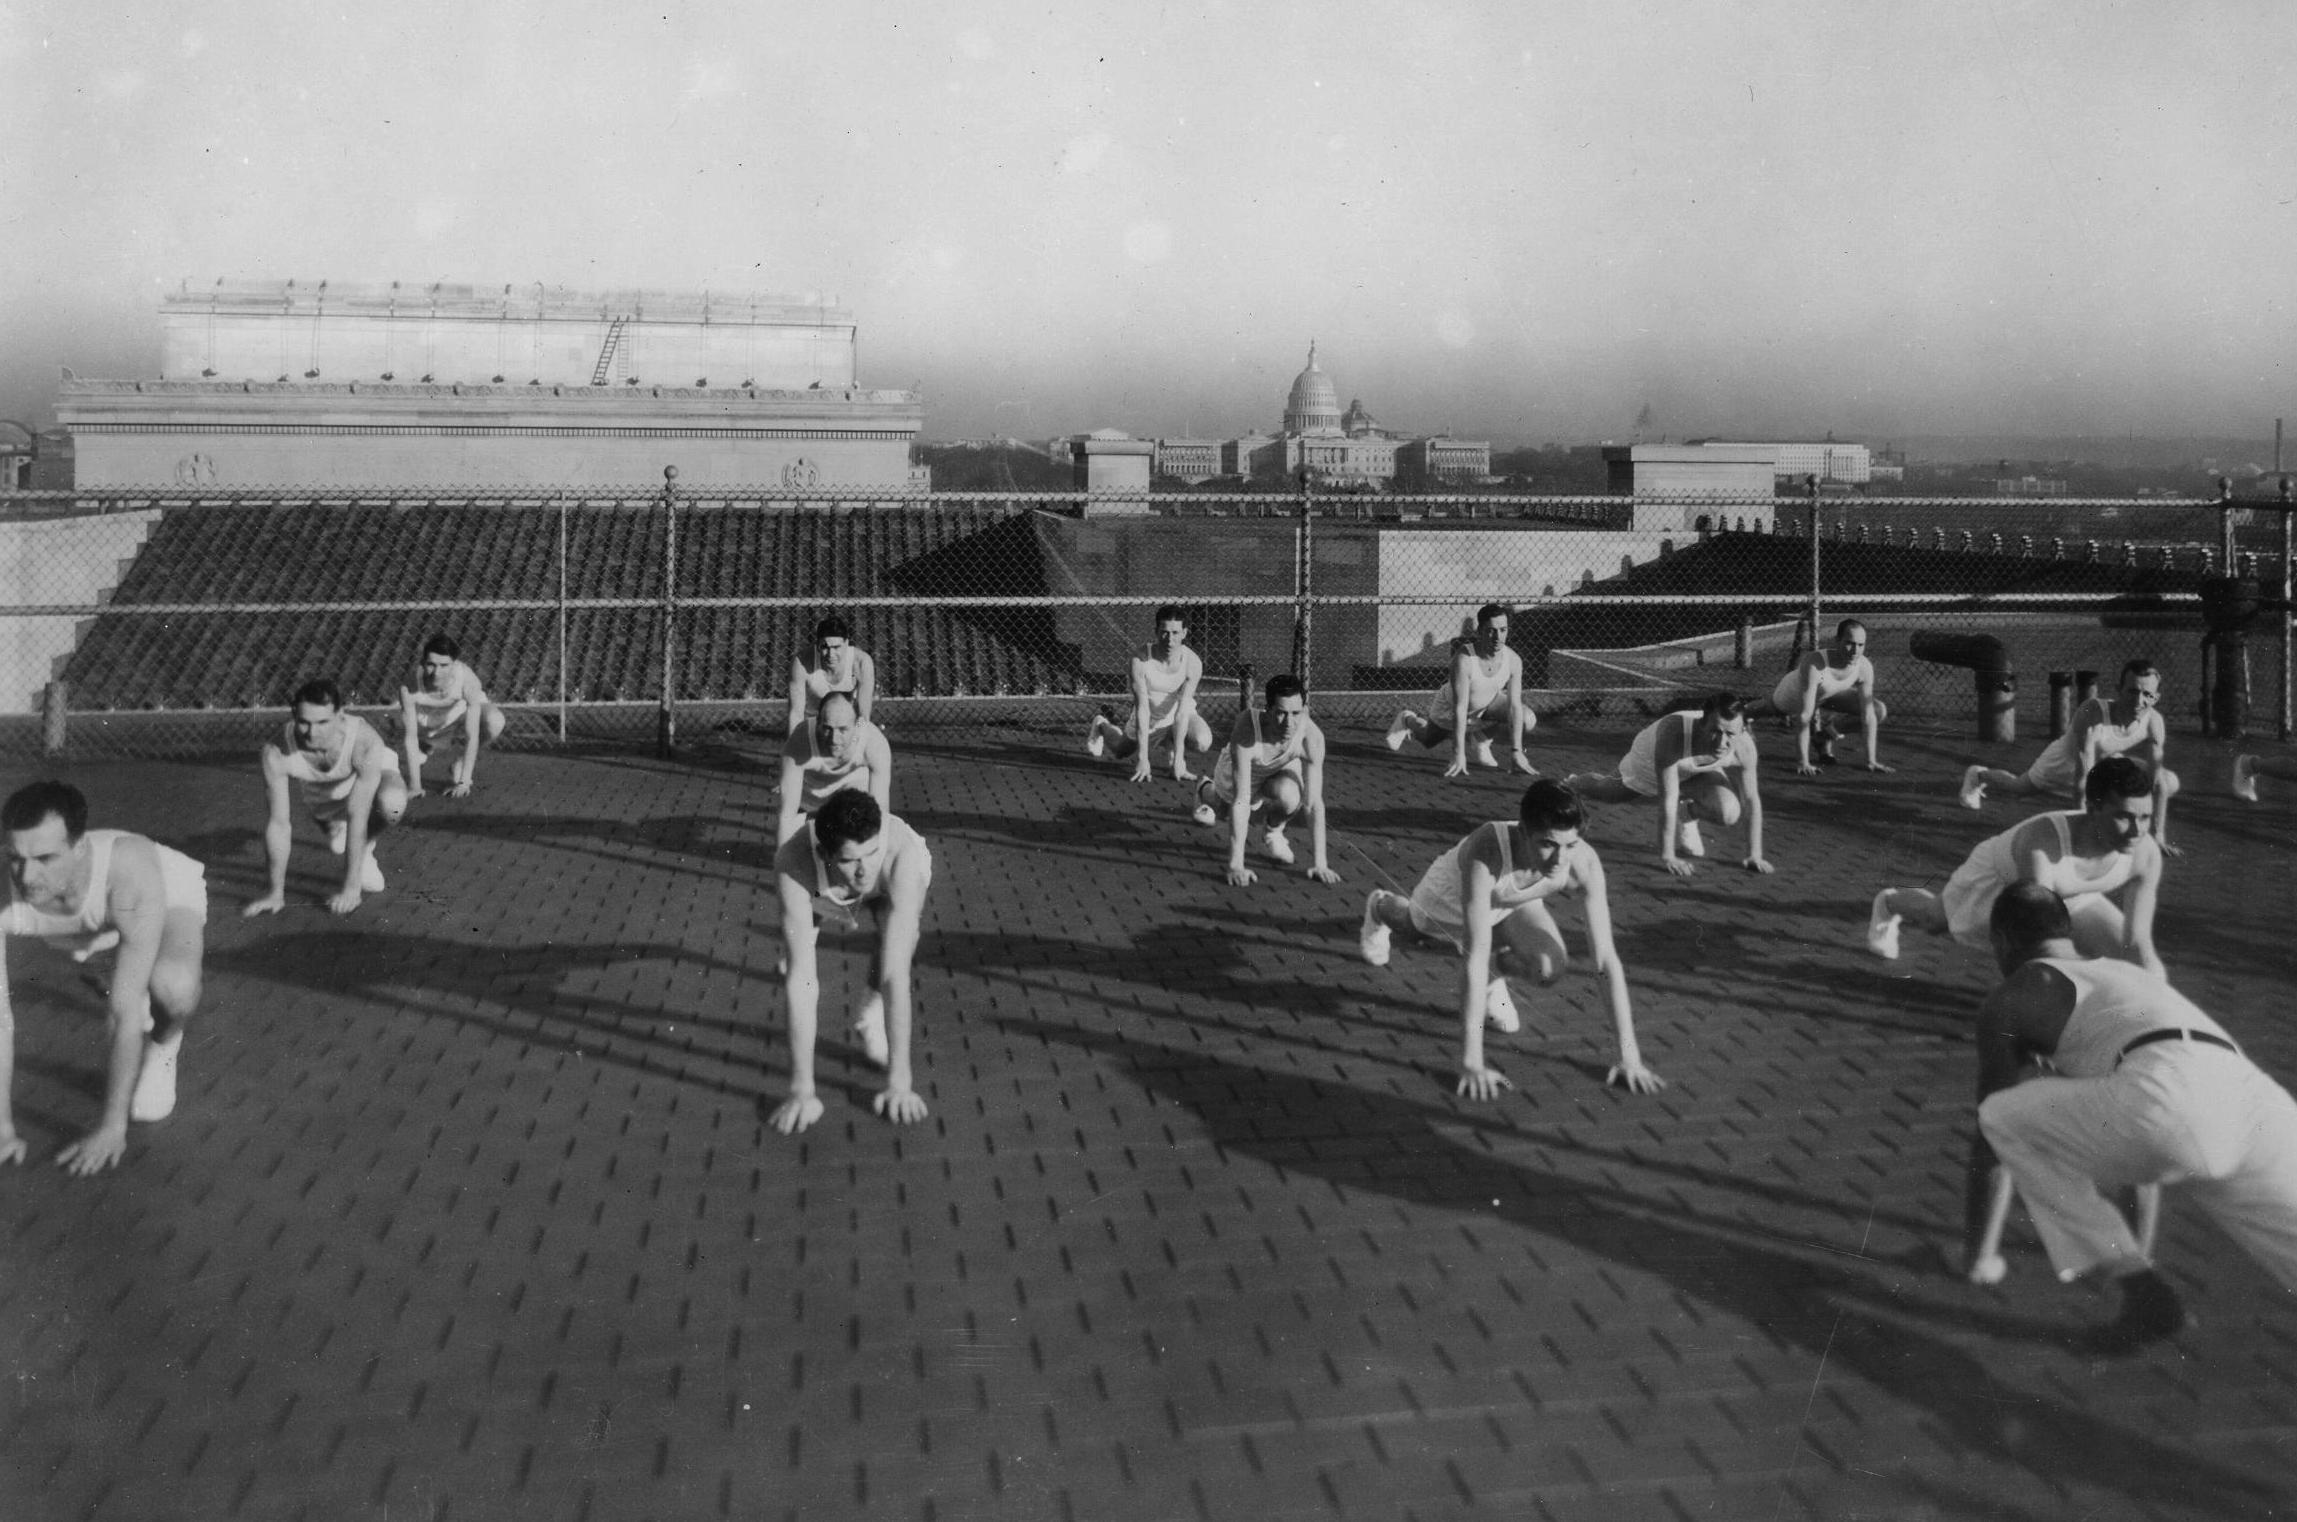 New Agents Train on Rooftop in the 1930s